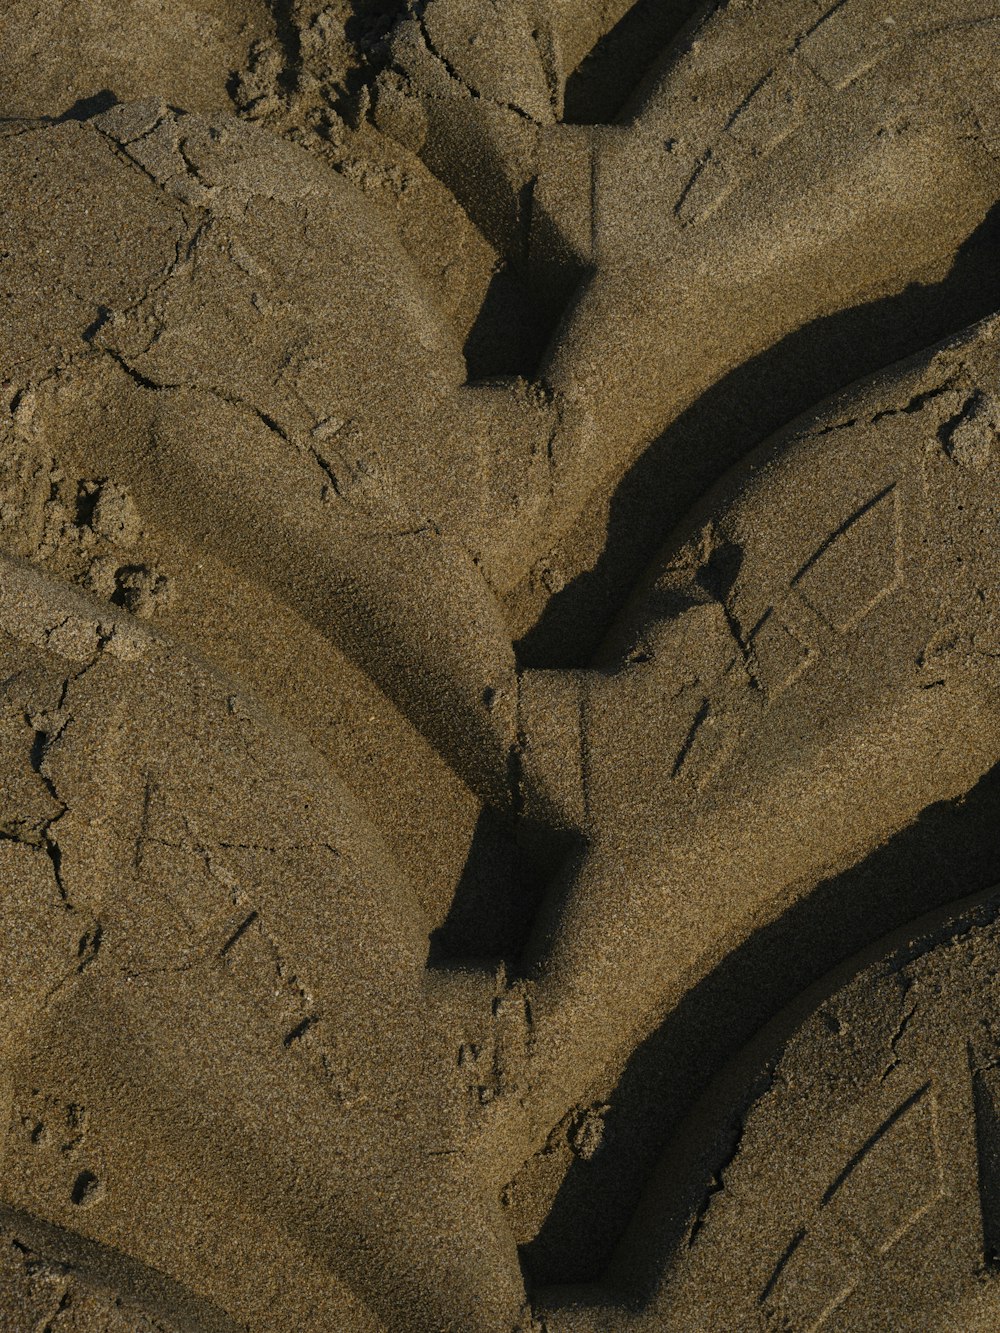 a close up of a tire in the sand